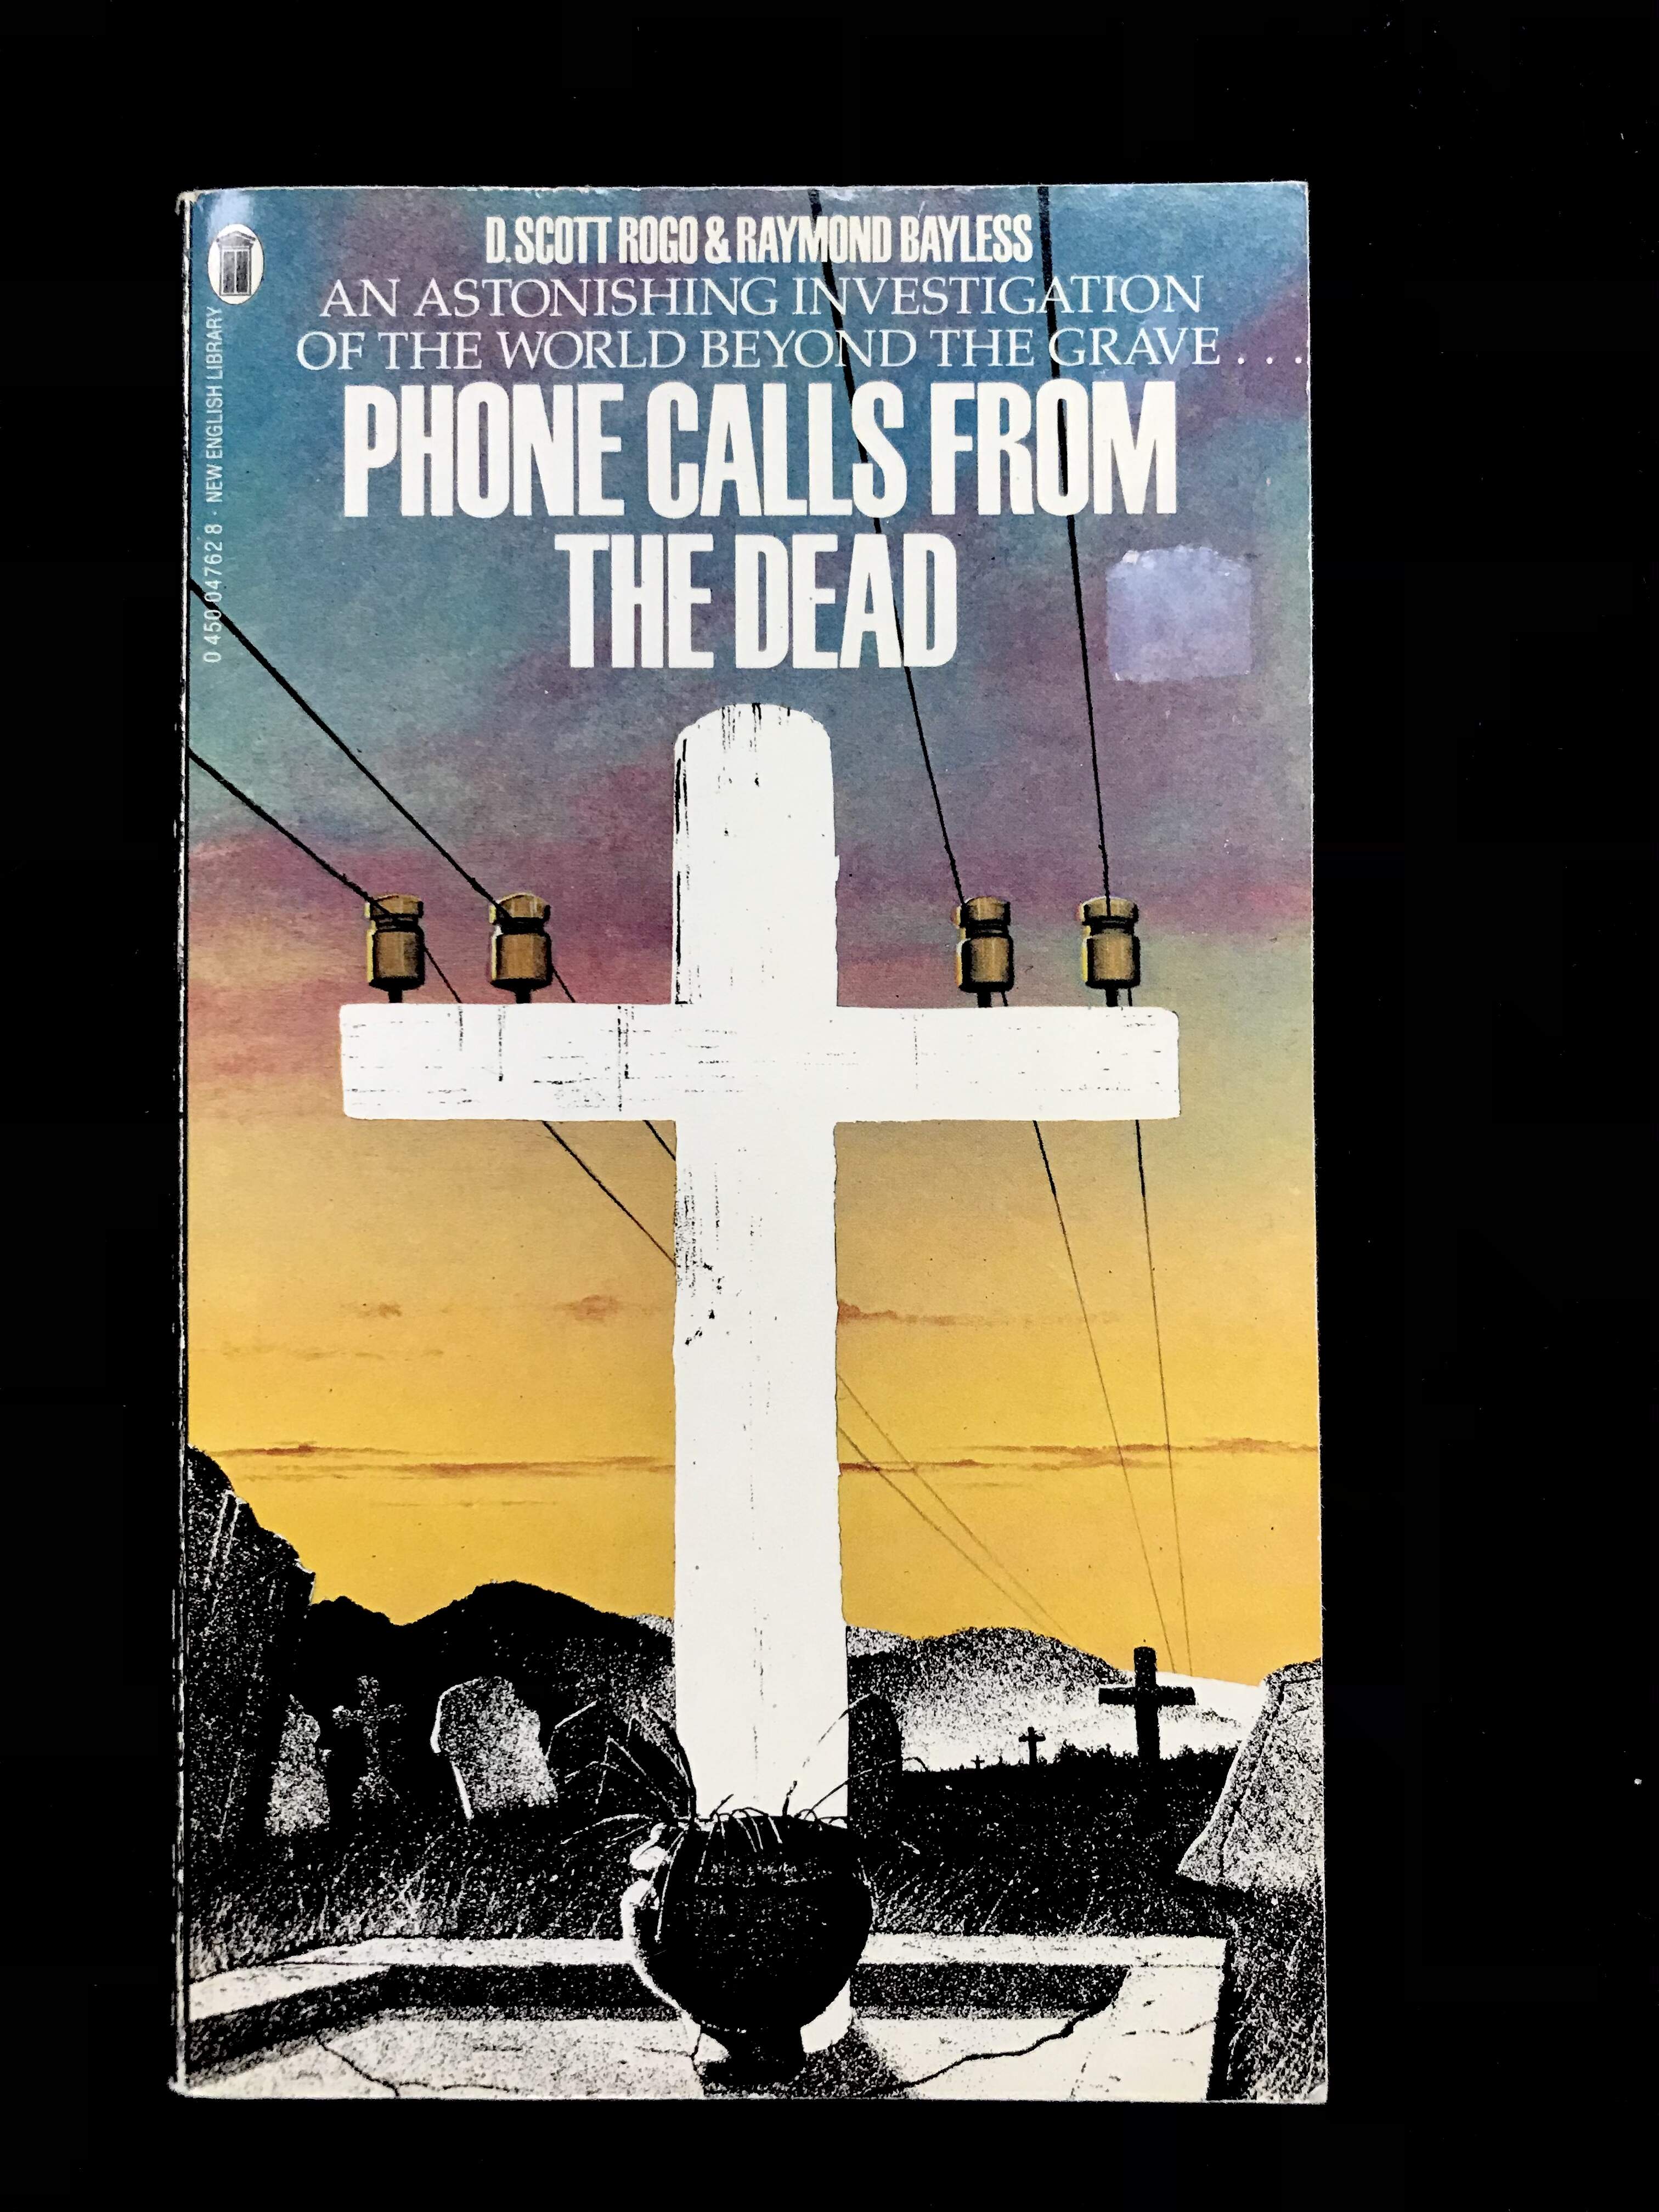 Phone Calls From The Dead by D. Scott Rogo & Raymond Bayliss